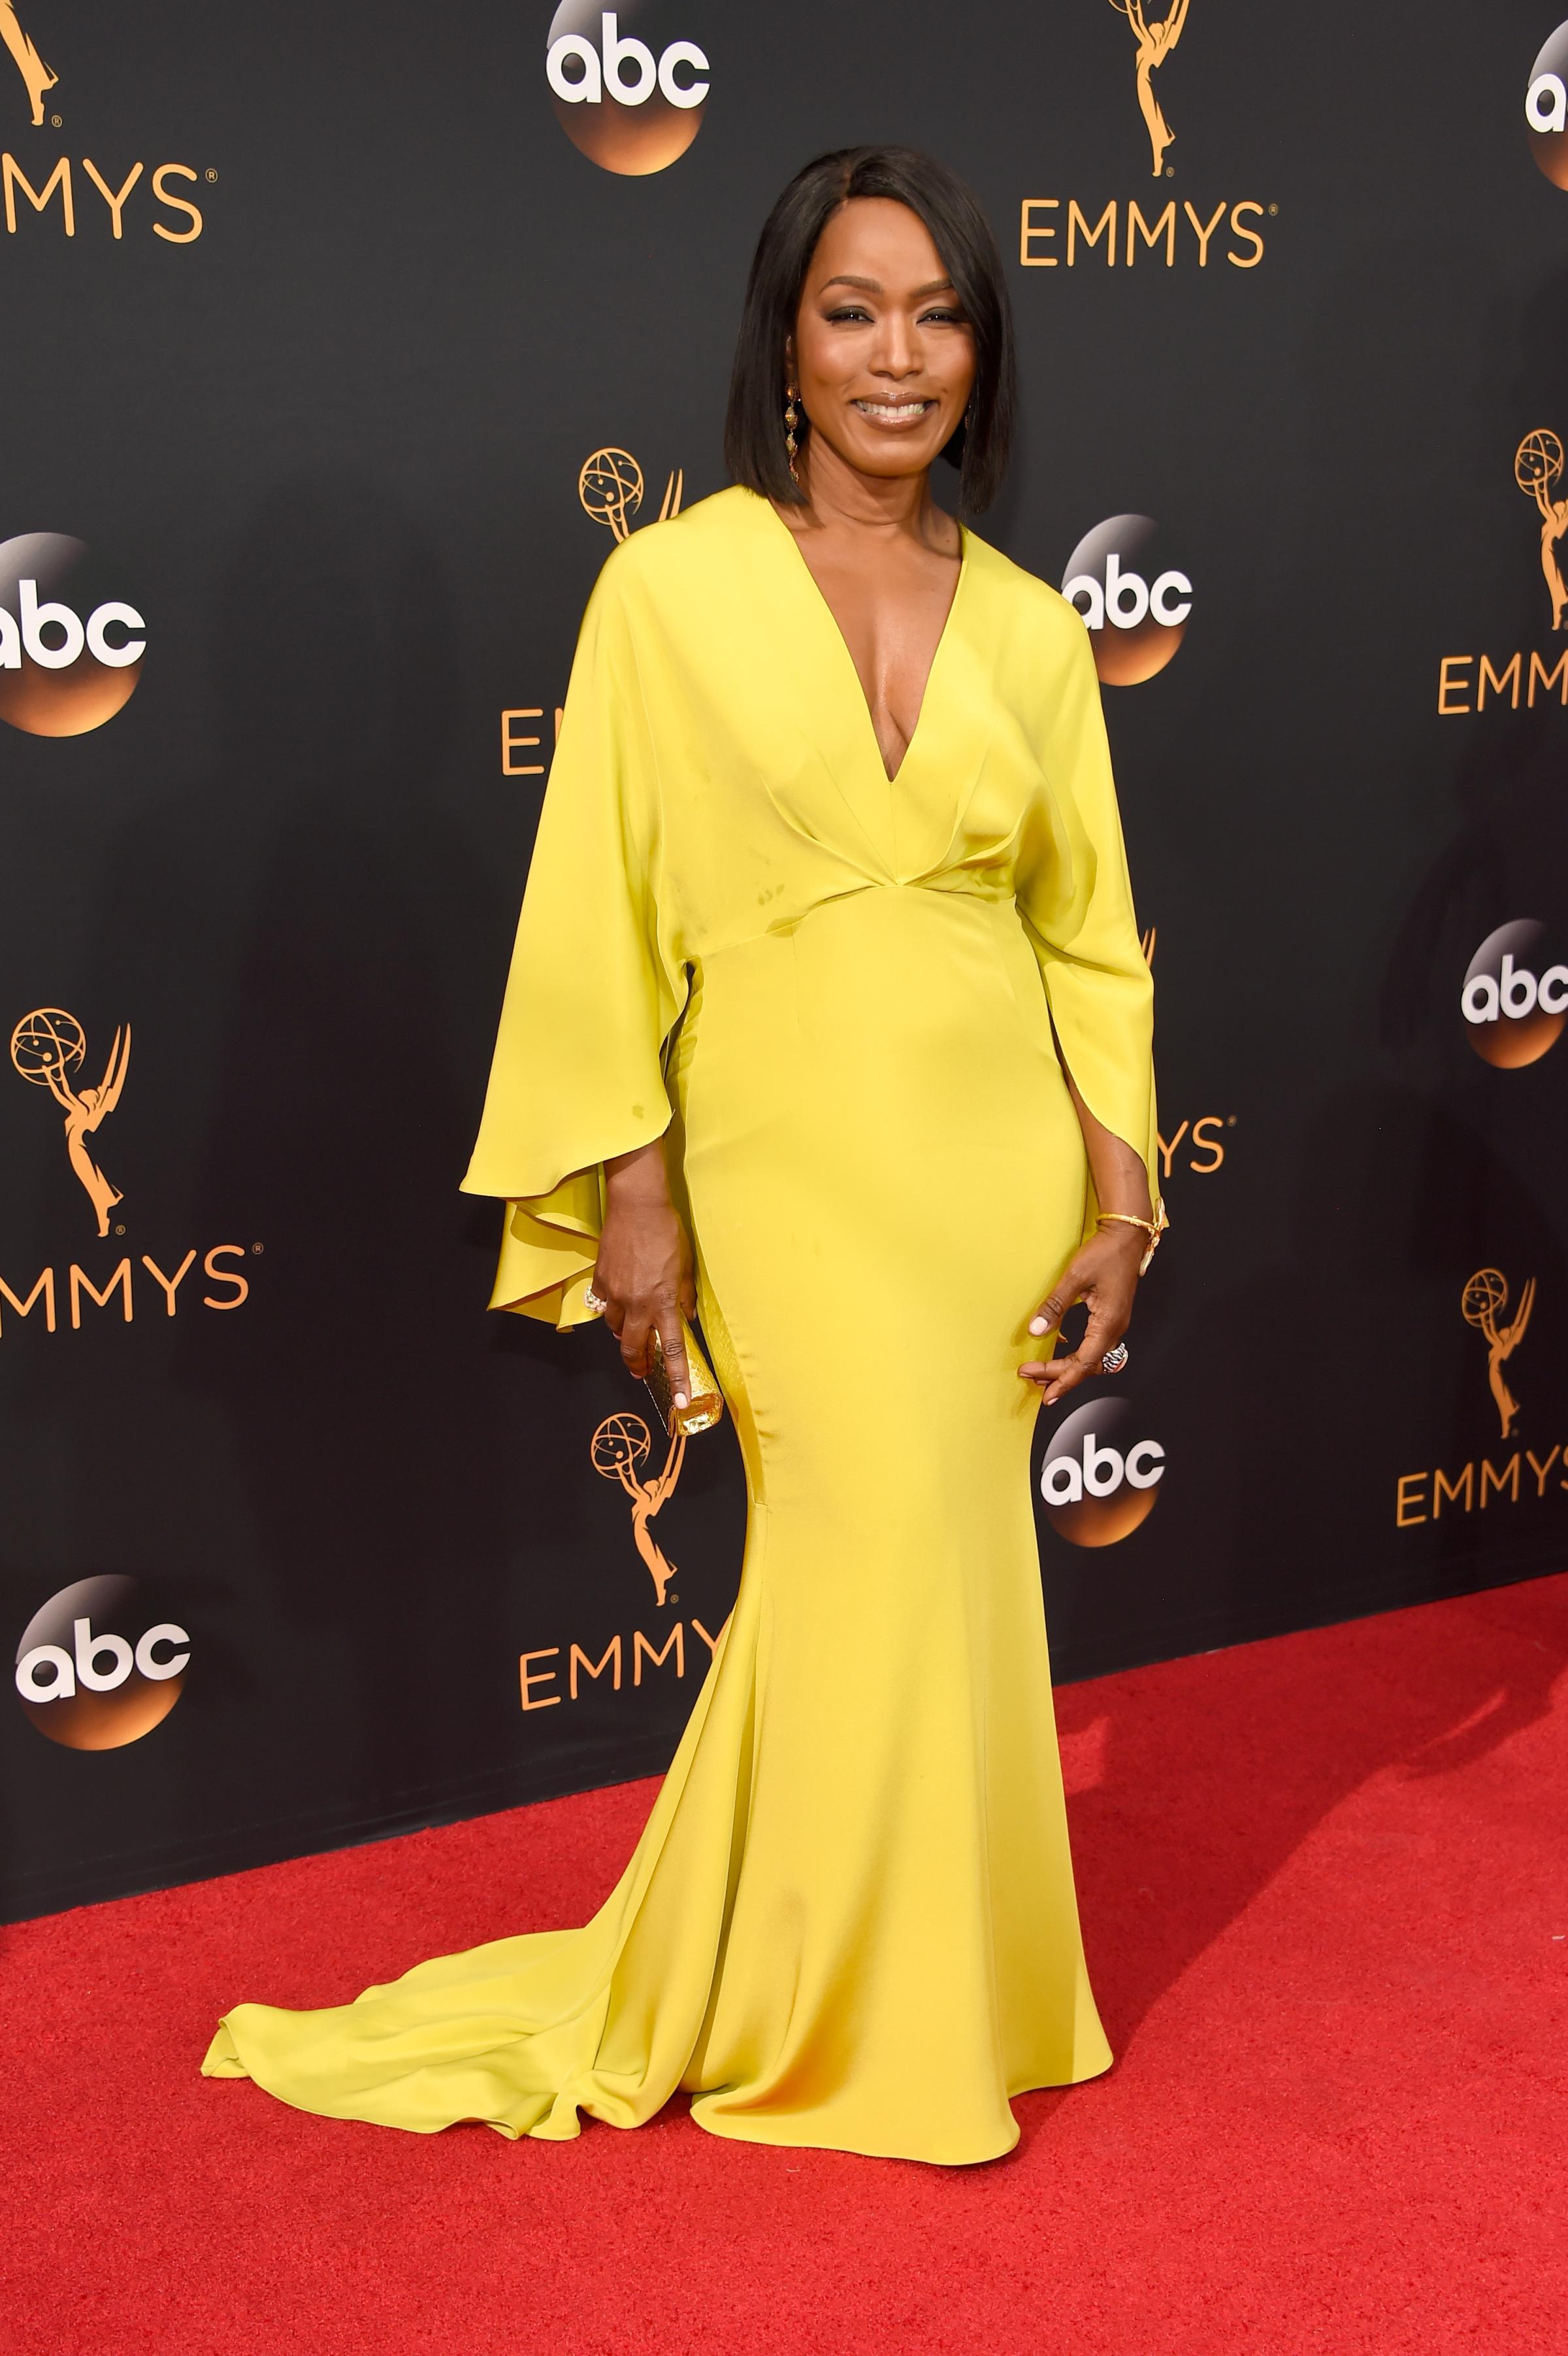 Angela Bassett arrives at the 68th Annual Primetime Emmy Awards at Microsoft Theater on September 18, 2016 in Los Angeles.